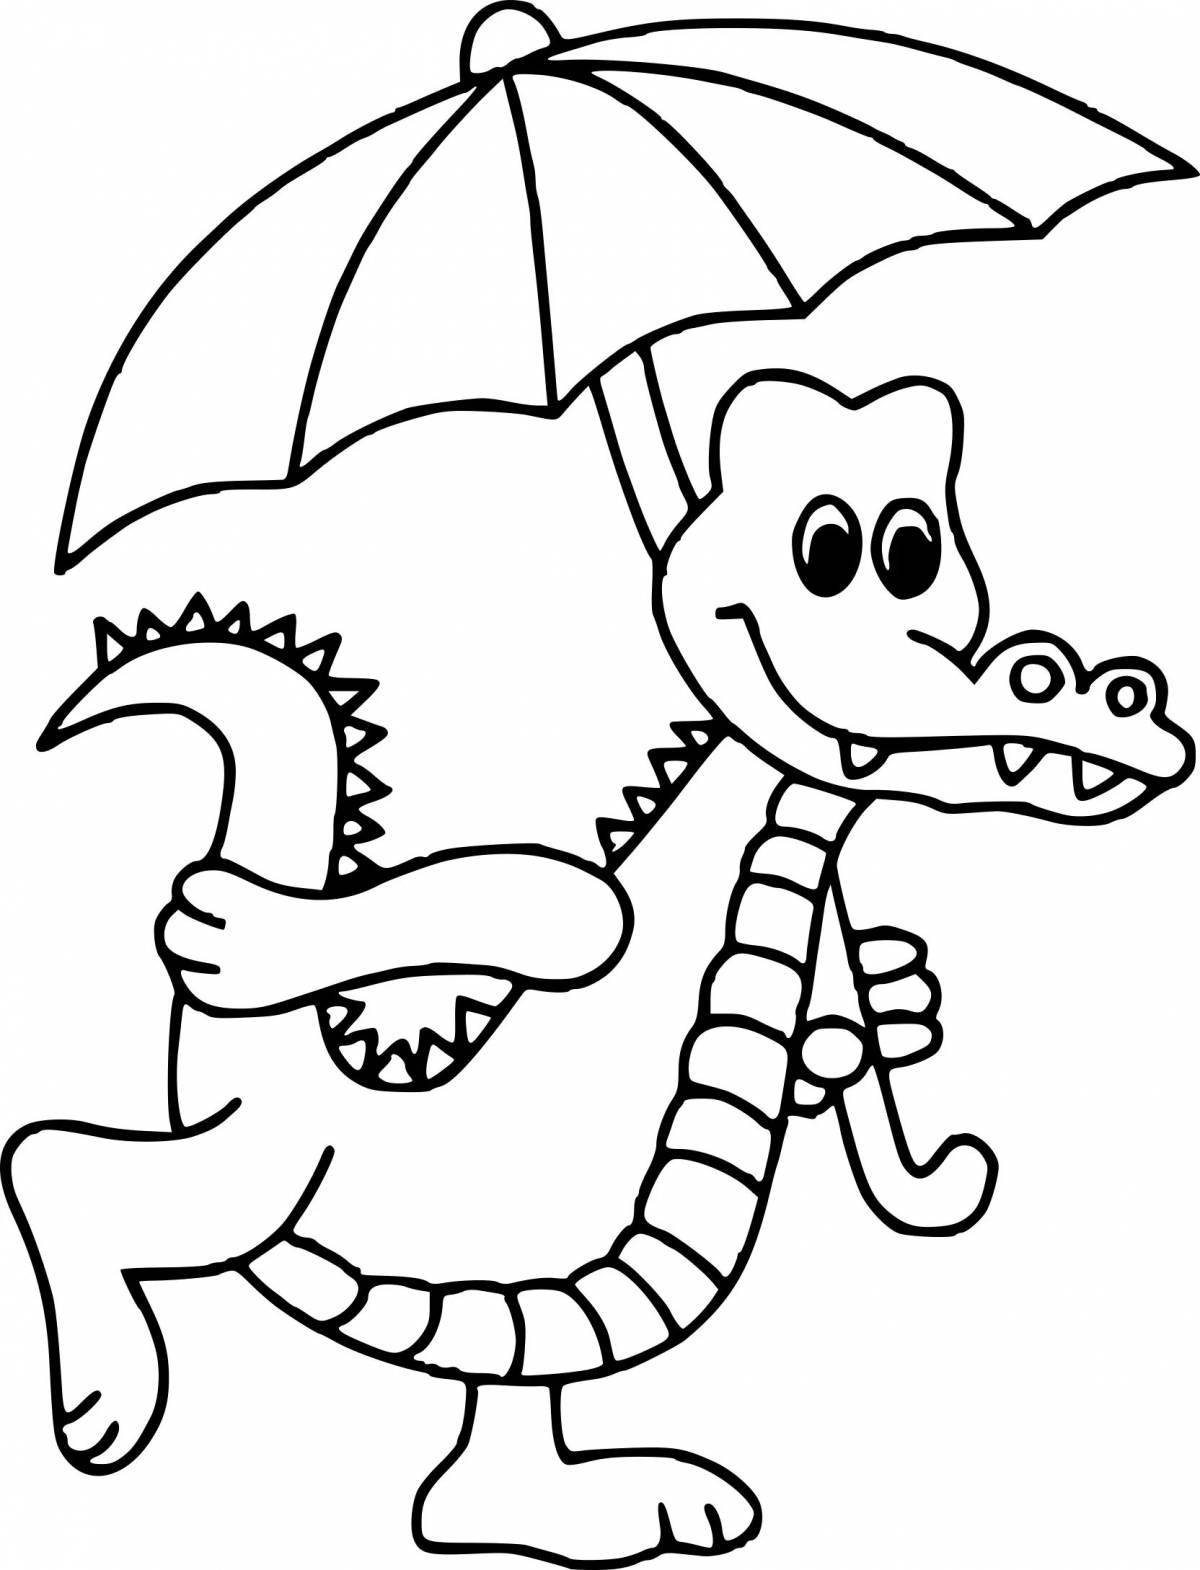 Colourful coloring crocodile for kids